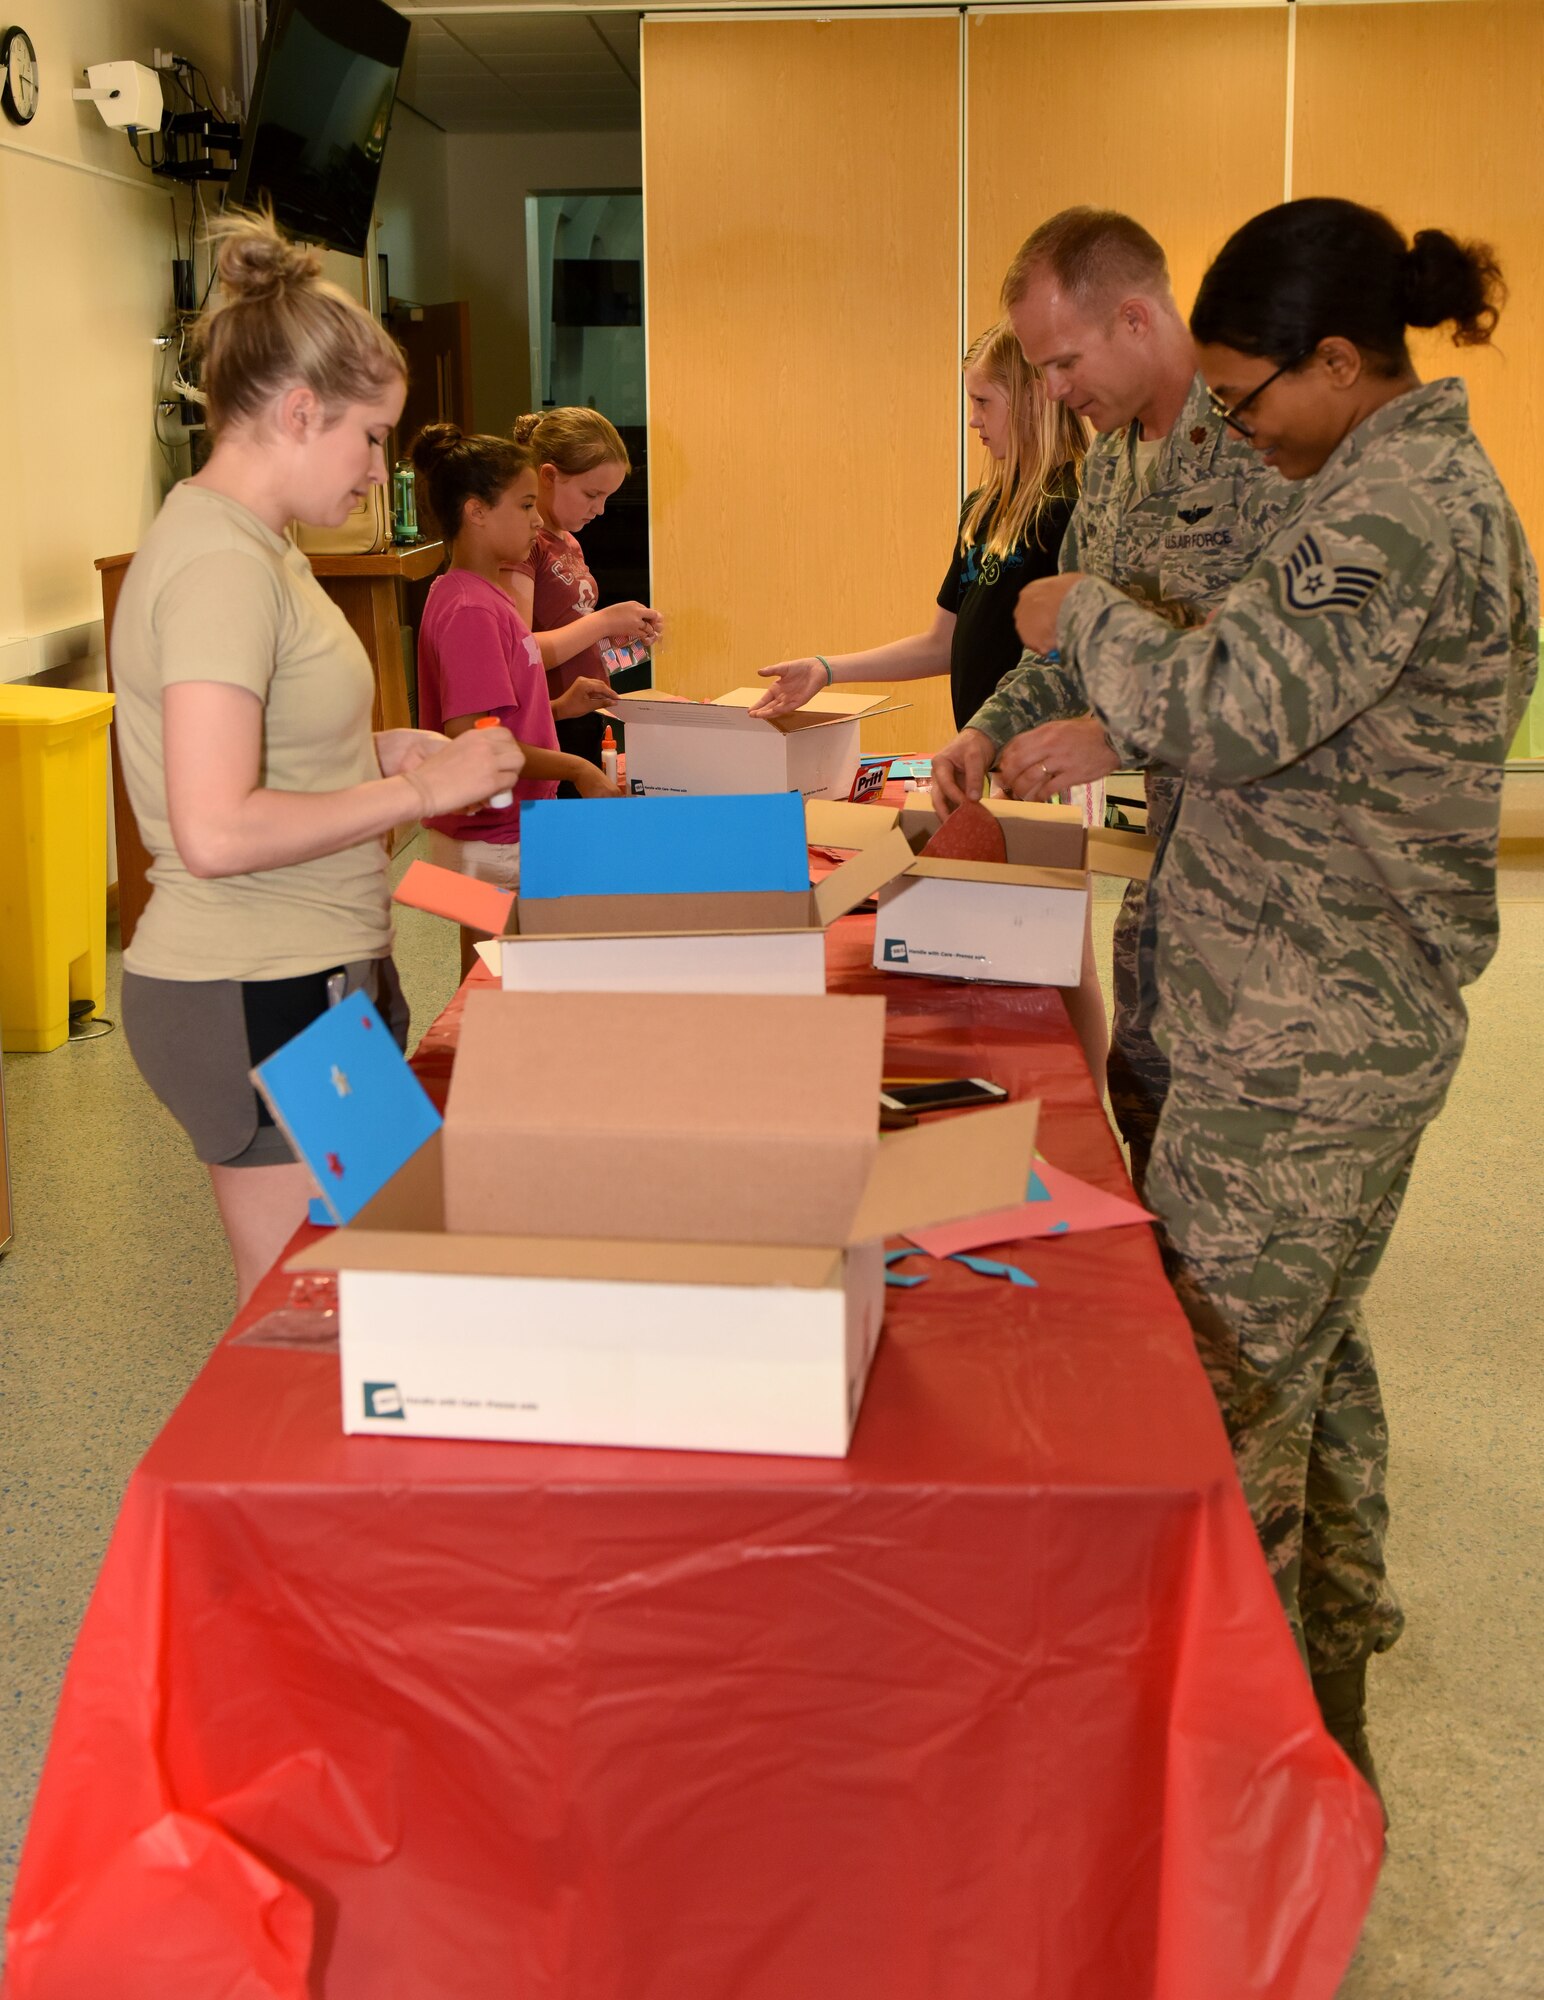 U.S. Airmen from the 100th Air Refueling Wing Wing Staff Agencies and other volunteers at RAF Mildenhall, England, decorate care packages for deployed personnel, July 24, 2018.  Once decorated, the care packages are filled with donated snacks and messages from family and friends. (US. Air Force photo by Senior Airman Lexie West)